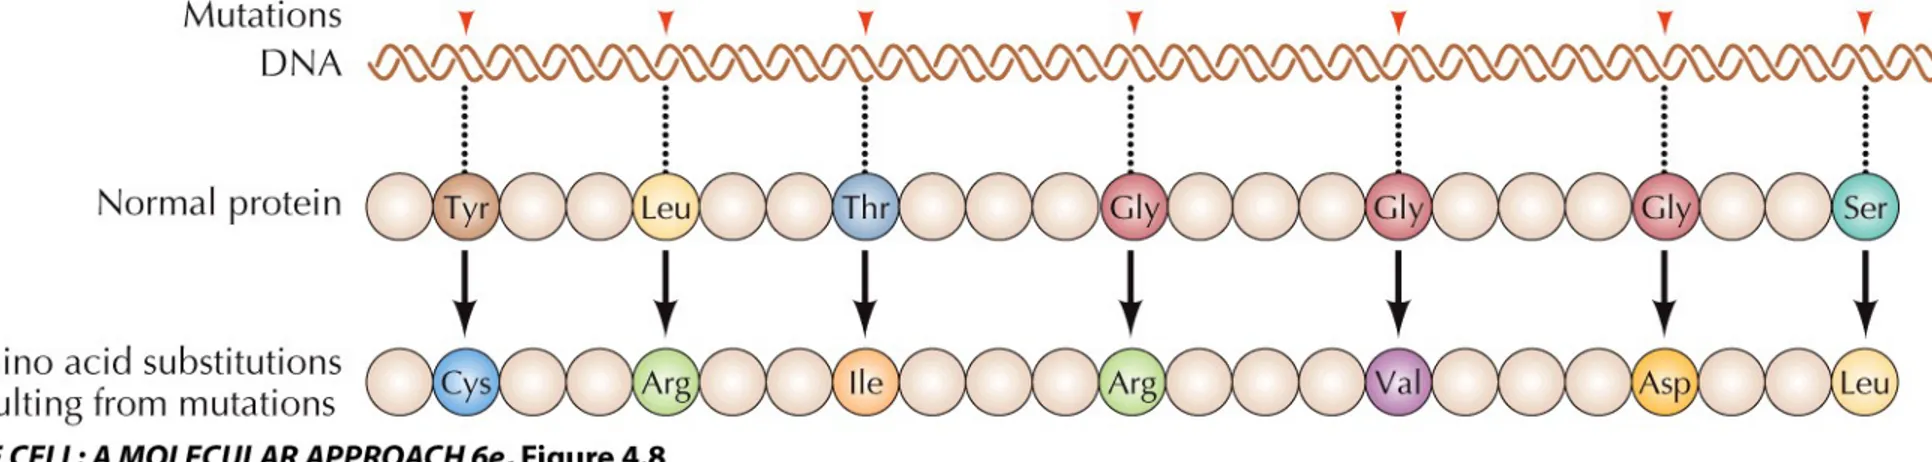 Figure 4.8  Colinearity of genes and proteins